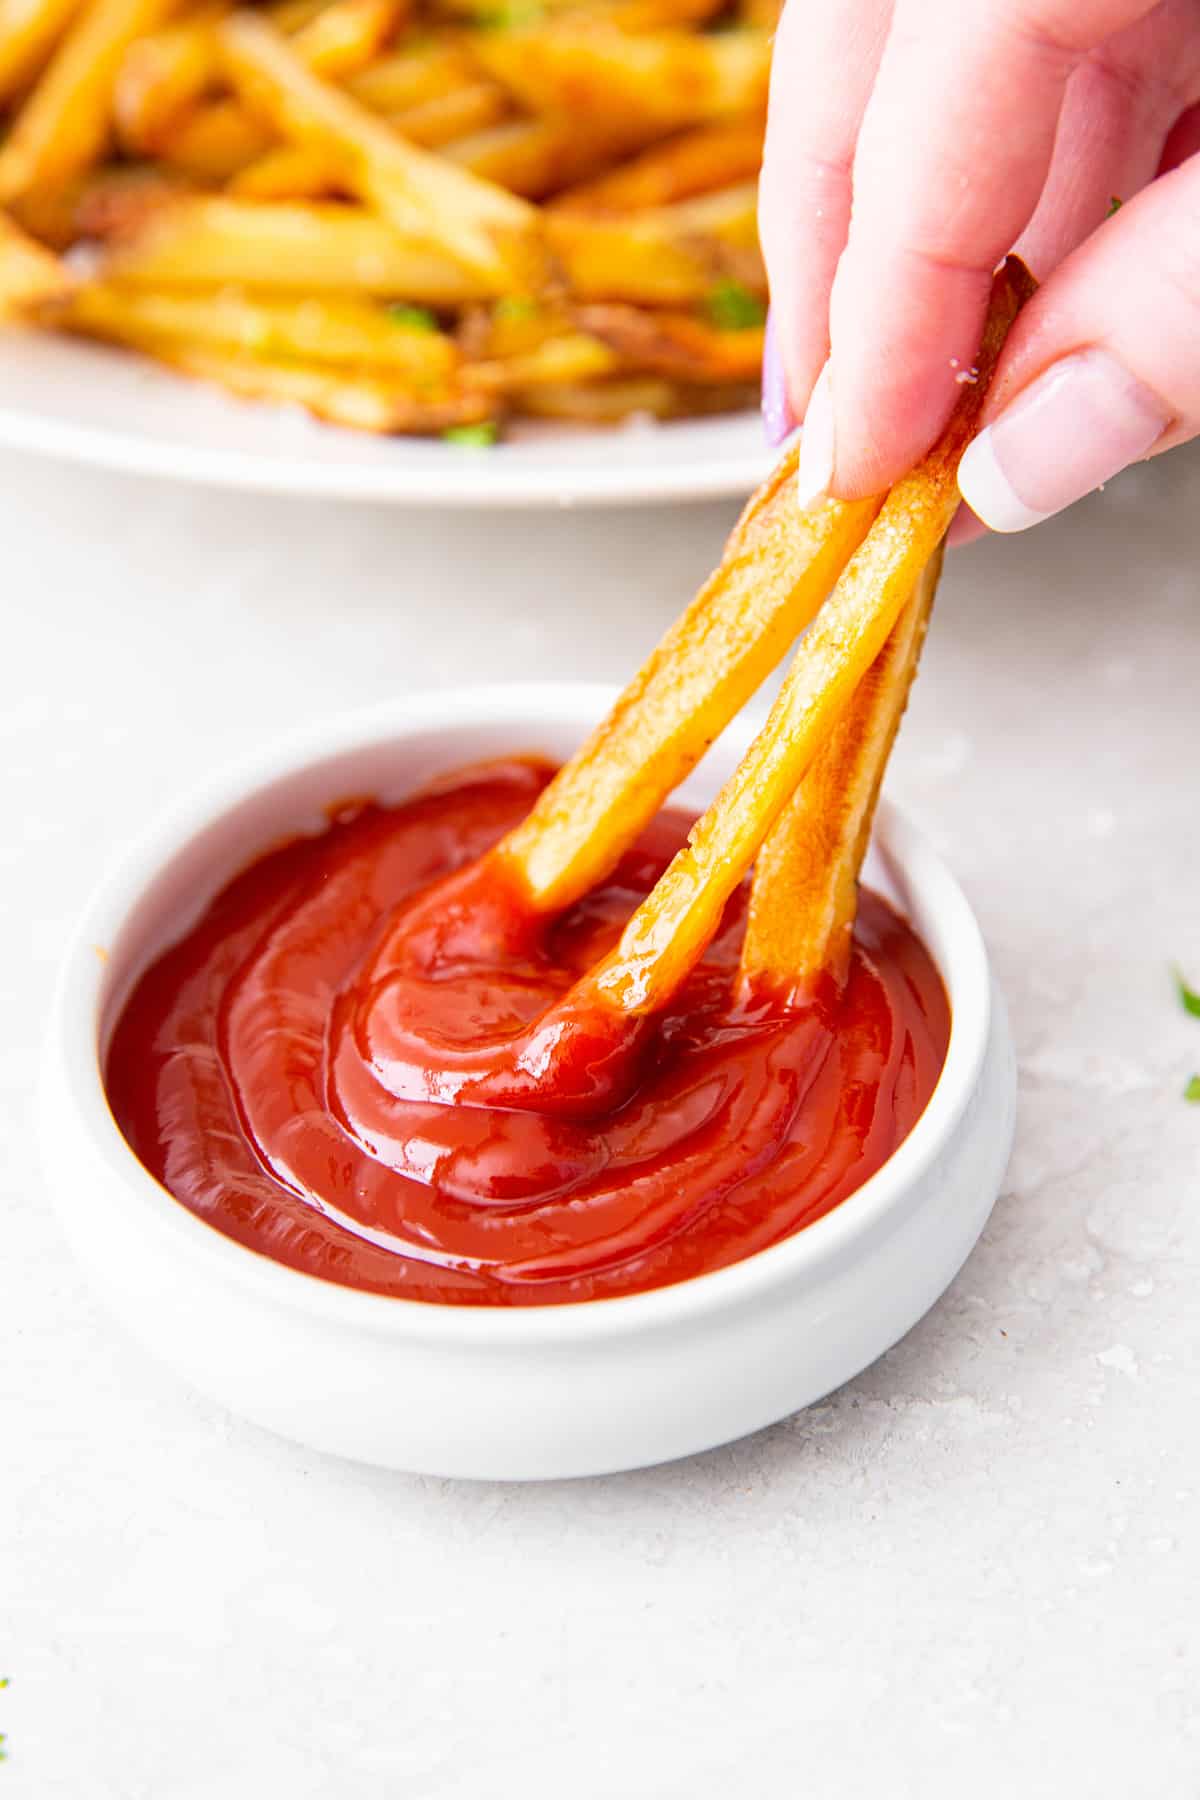 Fingers dipping 3 baked fries in ketchup.